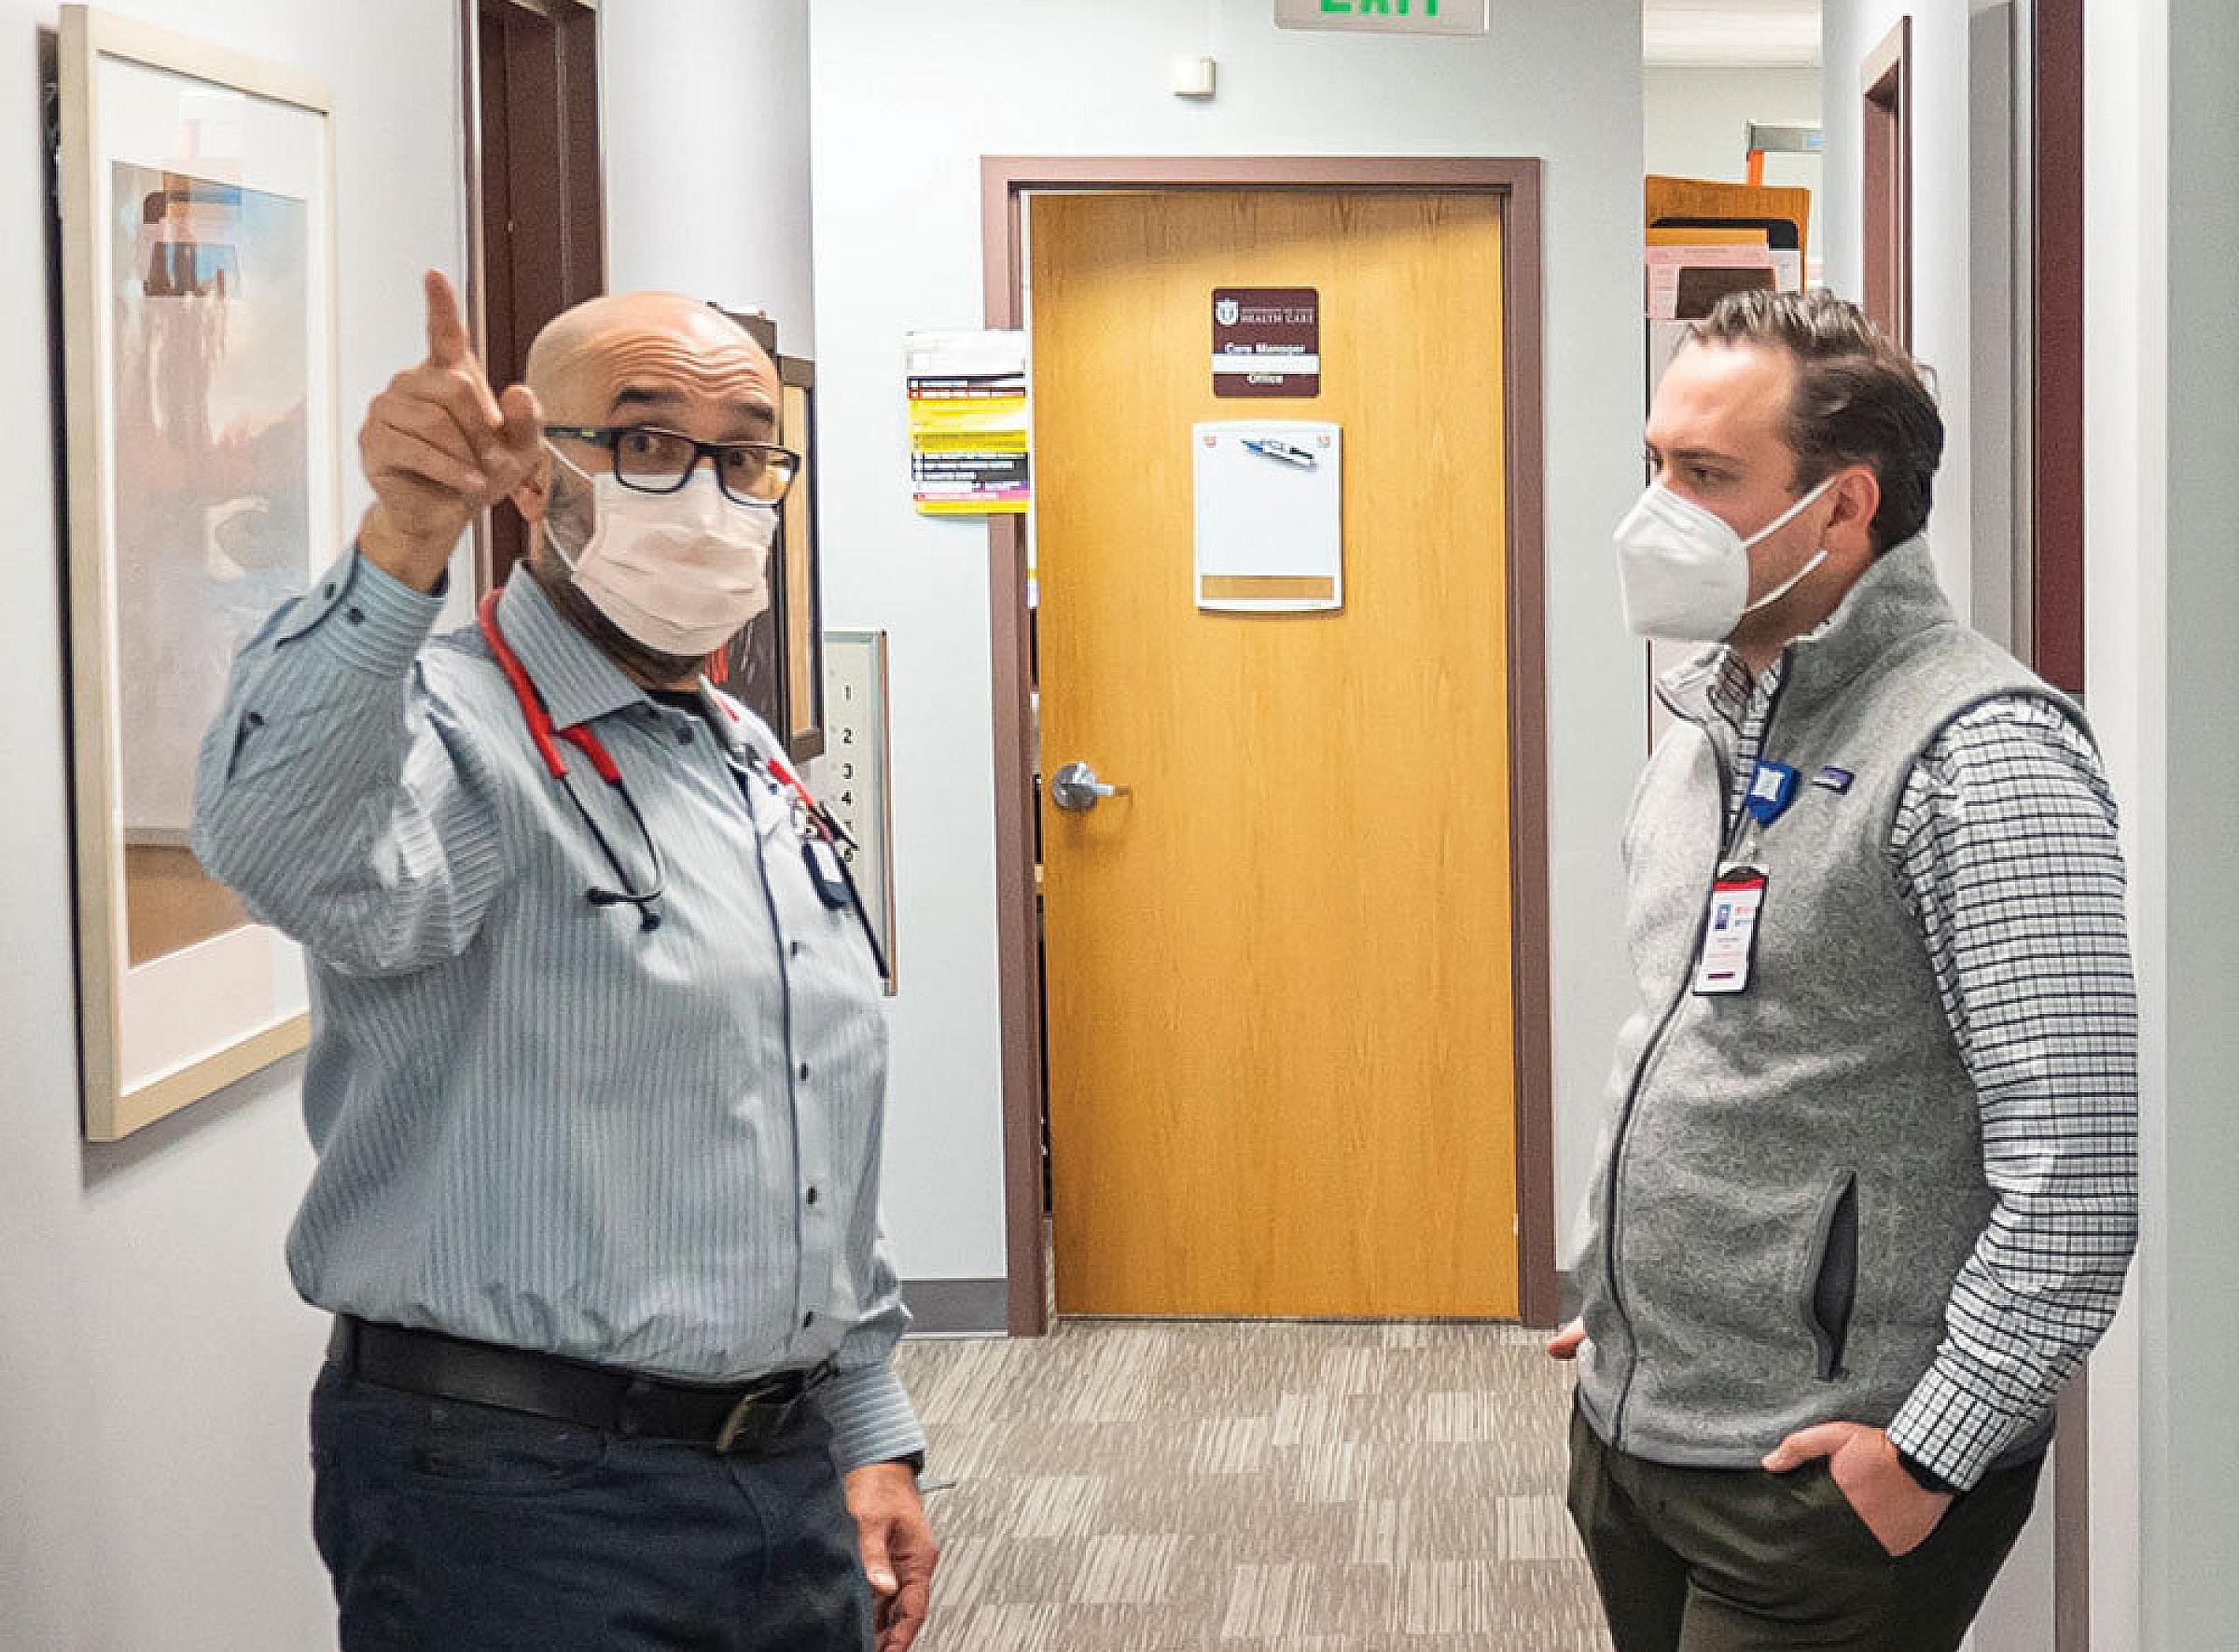 Huntsman Cancer Institute community health educator Nathaniel Ferre (right) meets with Ali Salari, DO, medical director of the University of Utah Stansbury Health Center in Stansbury Park.